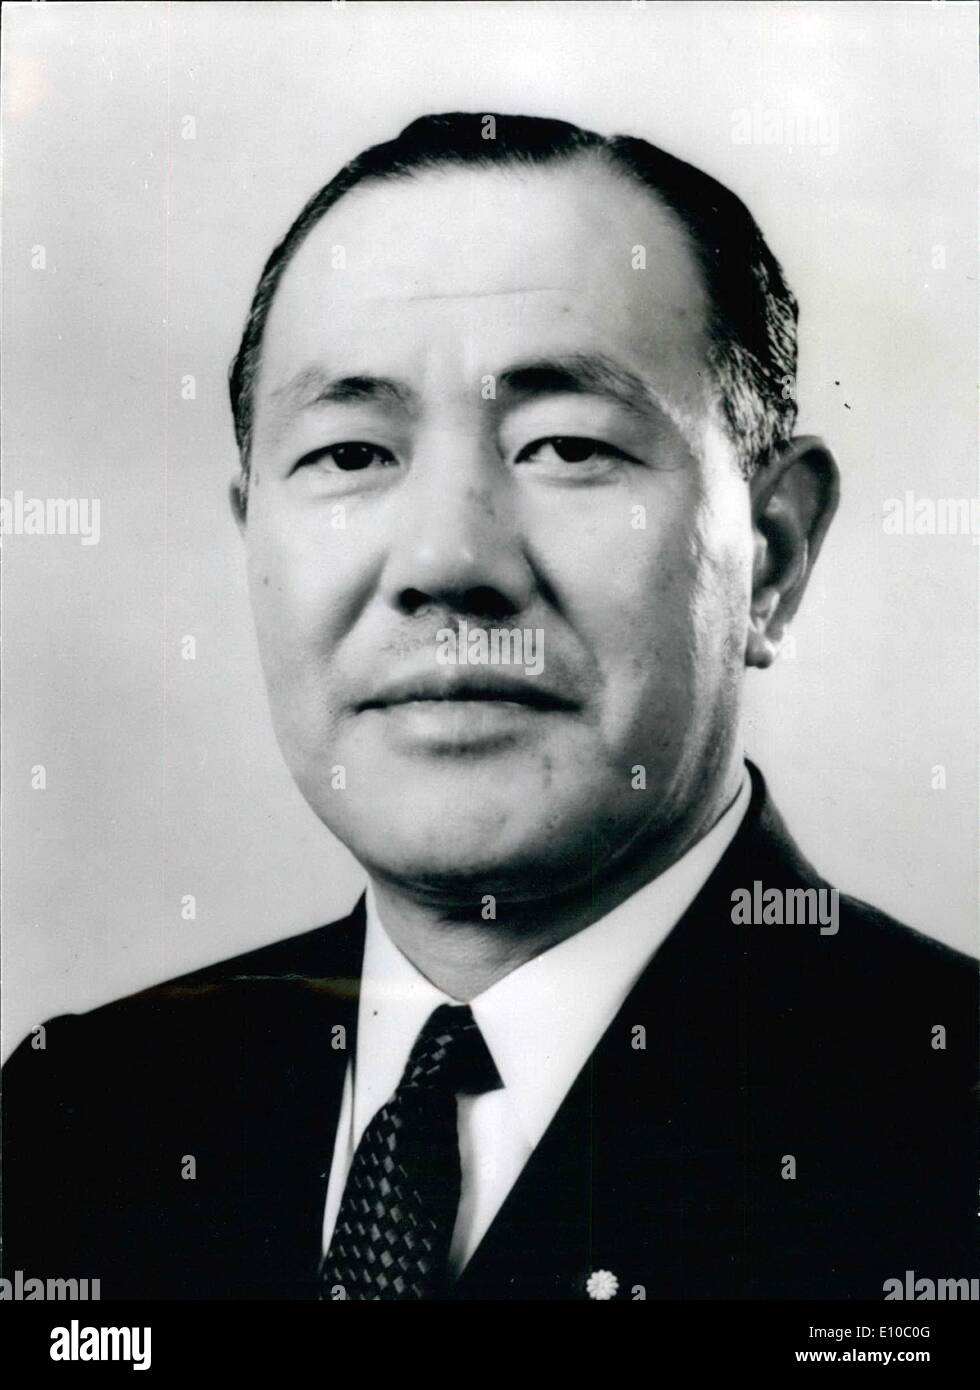 Jun. 06, 1972 - Next Prime Minister: After Prime Minister Eisaku Sato's announcement of his retiring, the four members of the Liberal Democratic Party have announced their candidacy for the Presidency of the Party. The election will be held on July 5th. The President of the Liberal Democratic Party is to be the next Prime Minister. Photo shows A recent portrait of Mr. Kakuei Tanaka, Minister of International Trade and Industry. Stock Photo